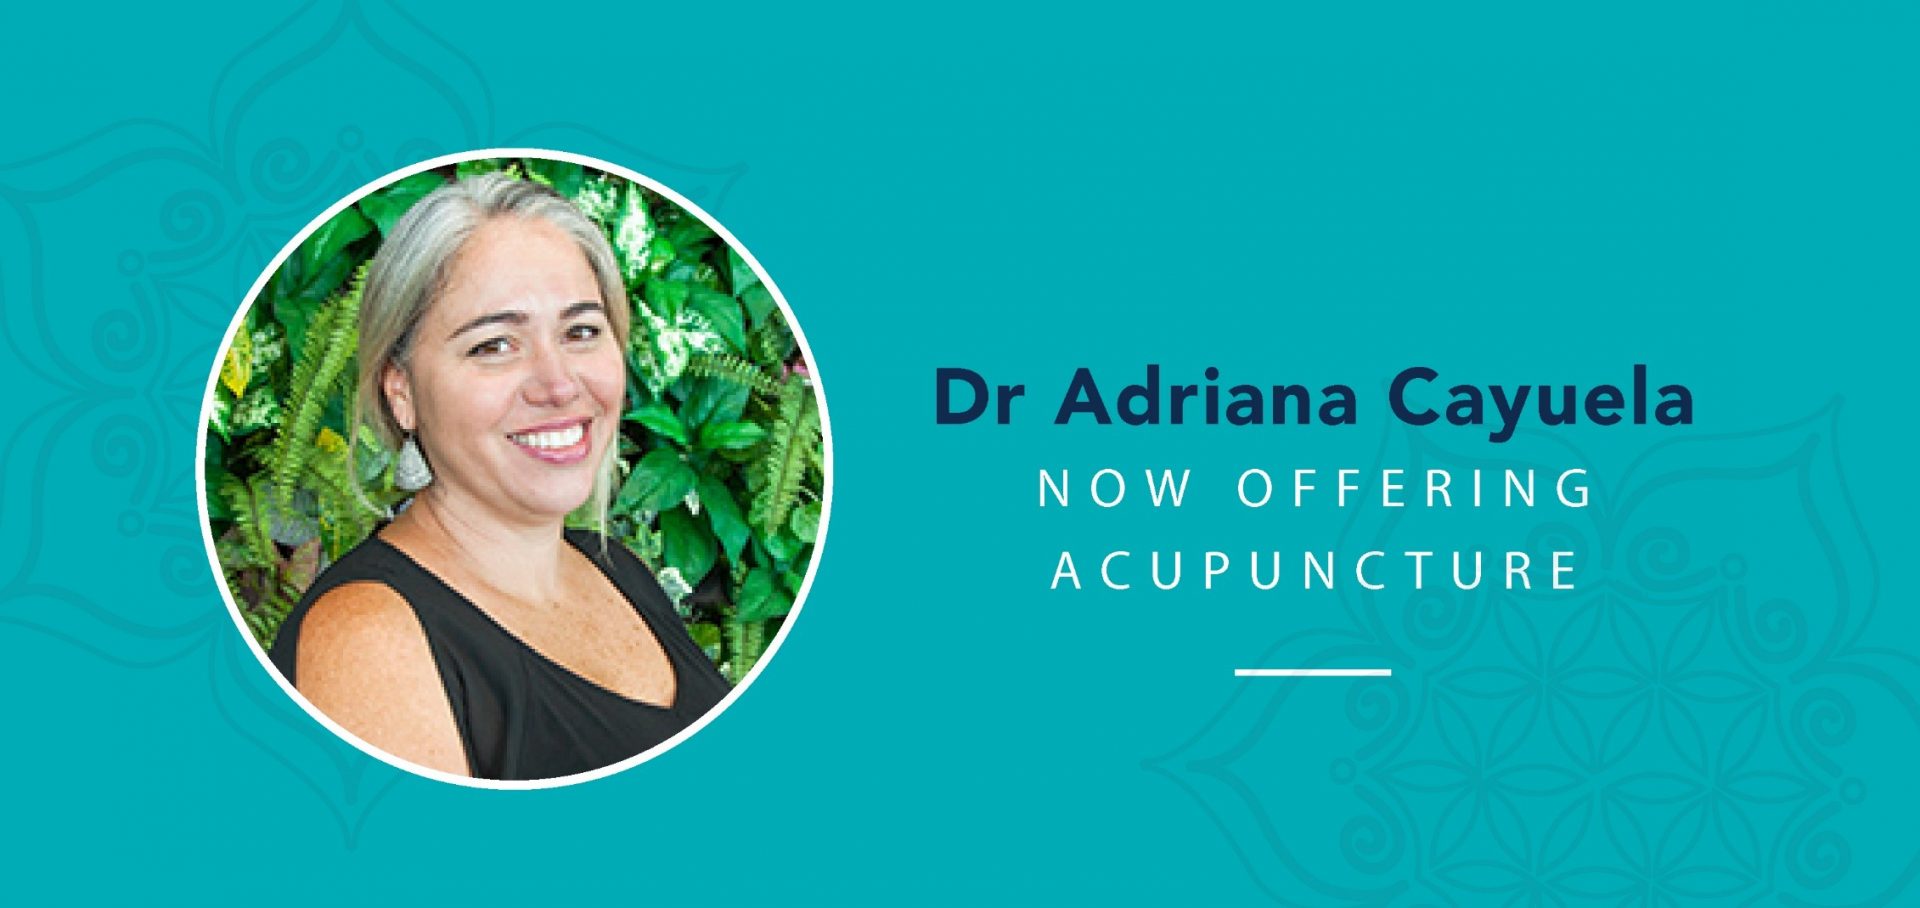 Dr Adriana Cayuela Now Offering Acupuncture at Gold Coast Holistic Dental Care